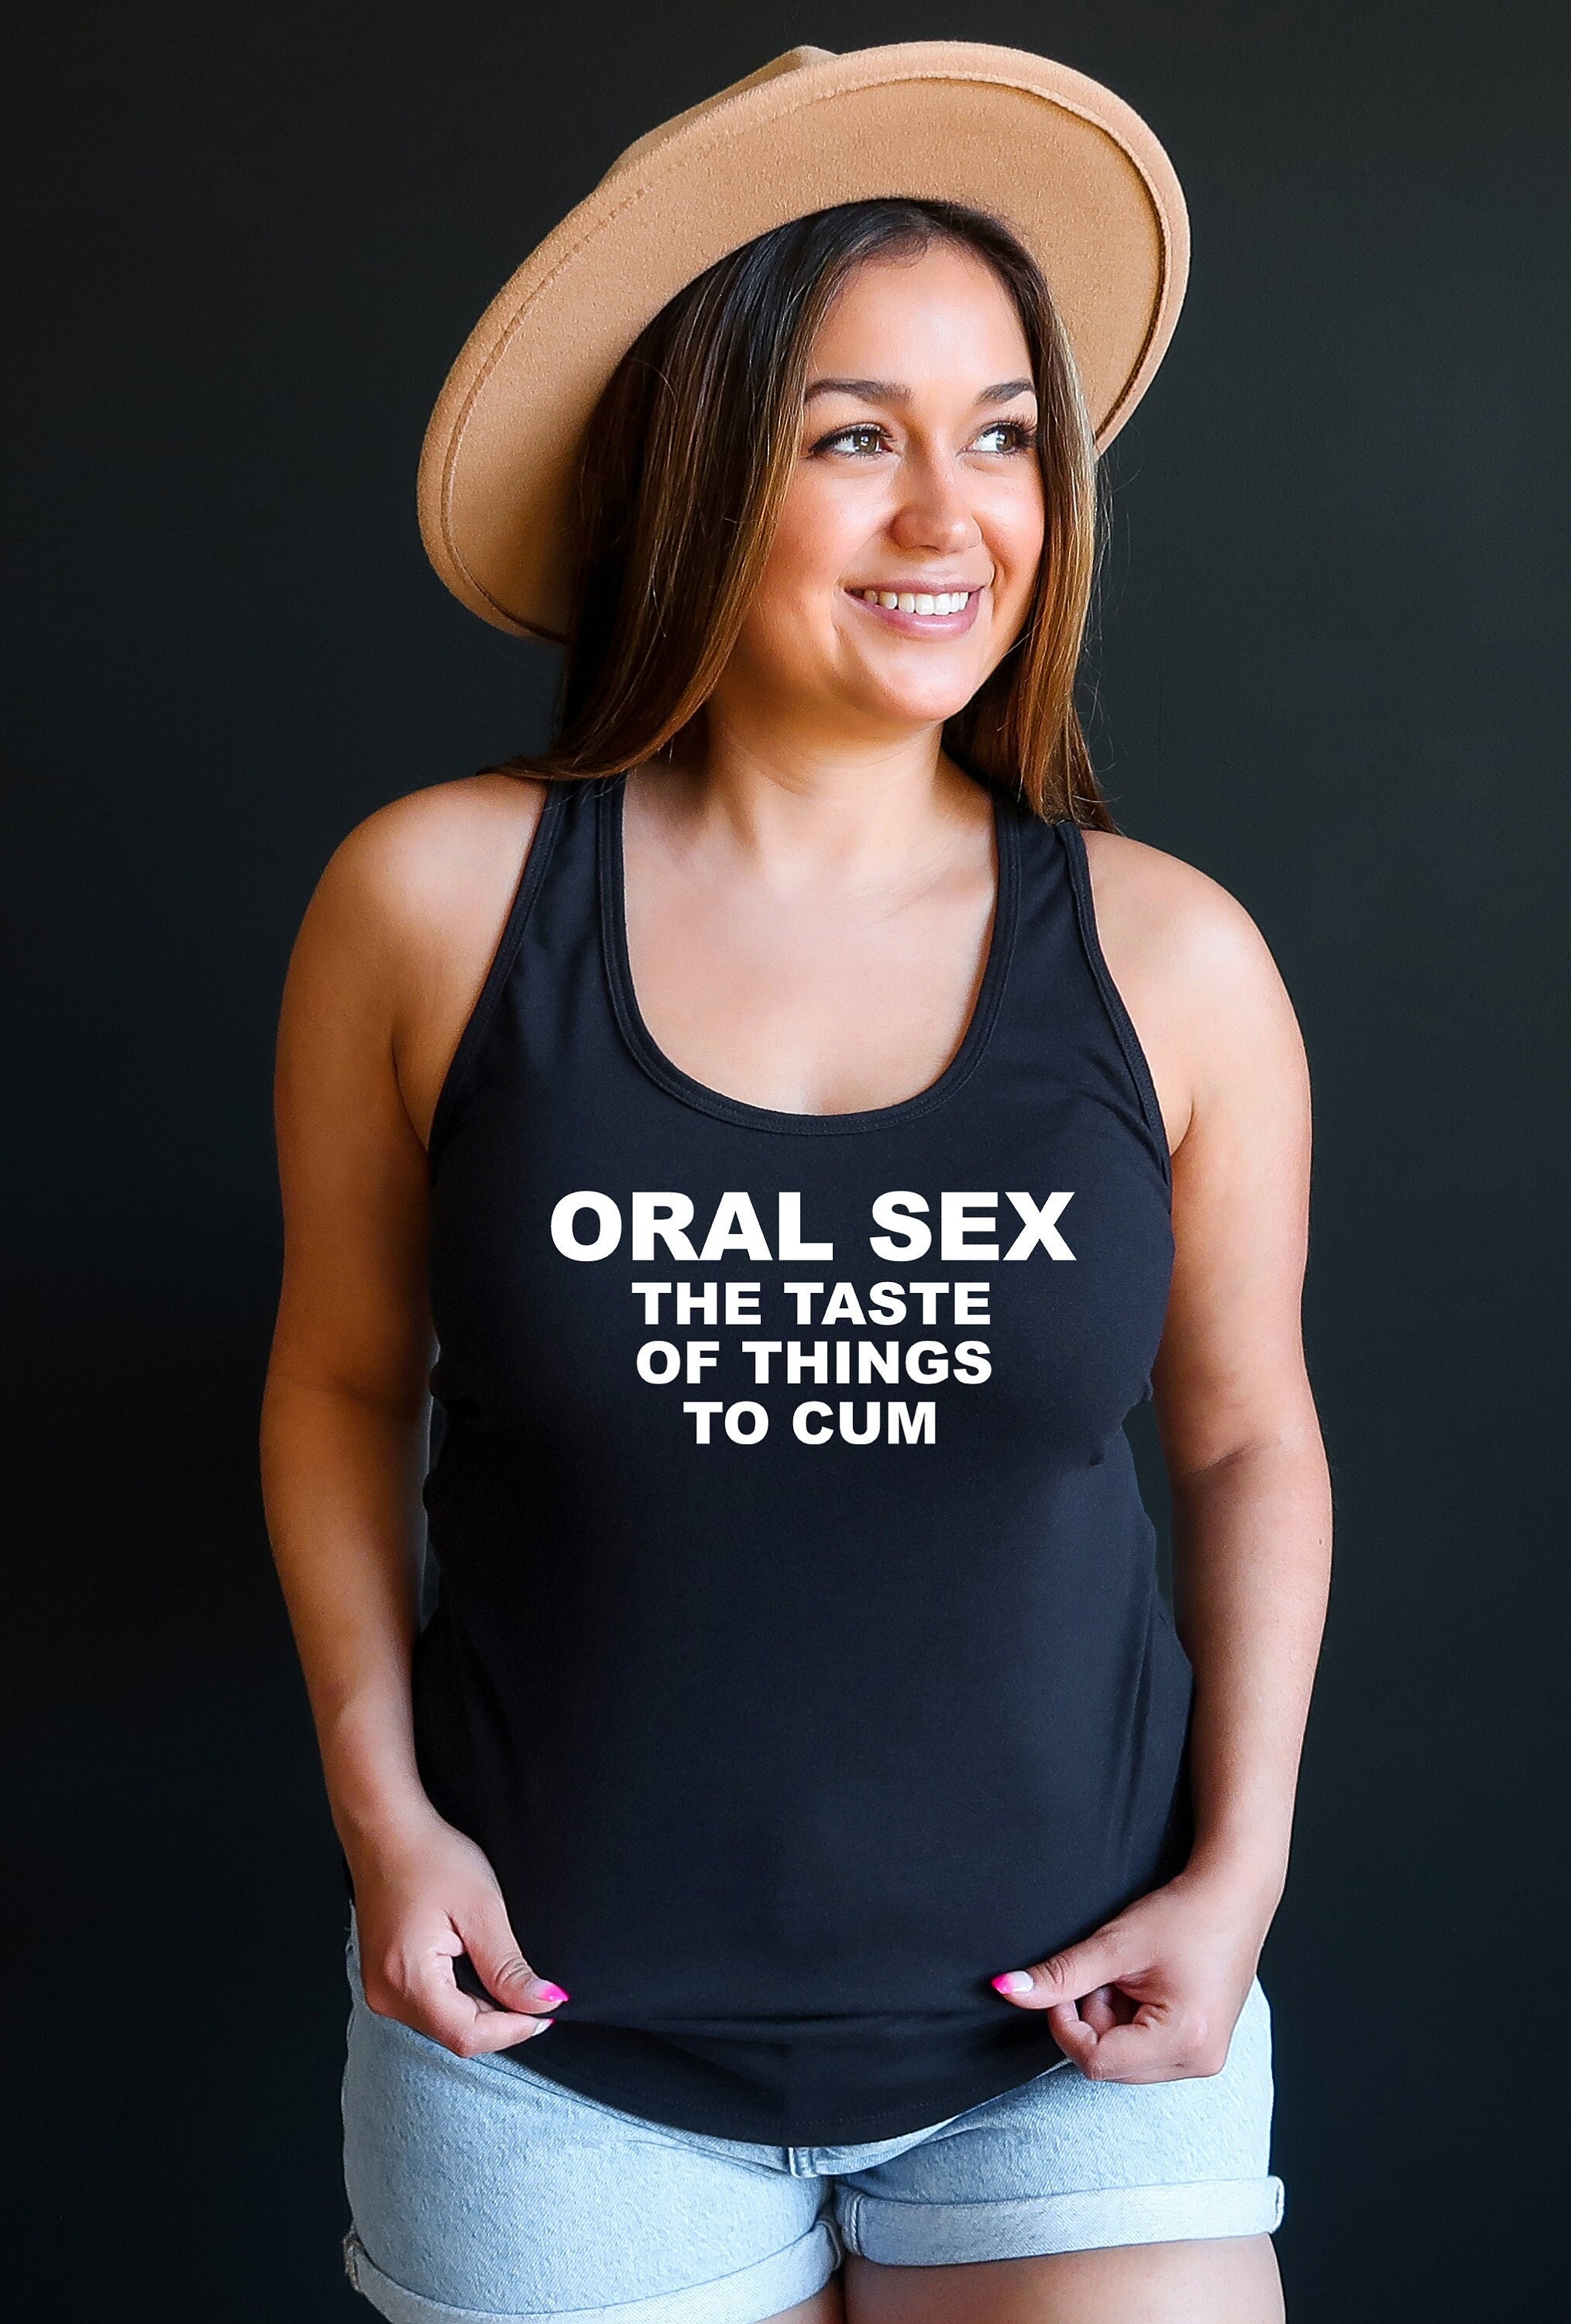 Oral Sex Shirt / Oral Sex the Taste of Things to Cum / BJ